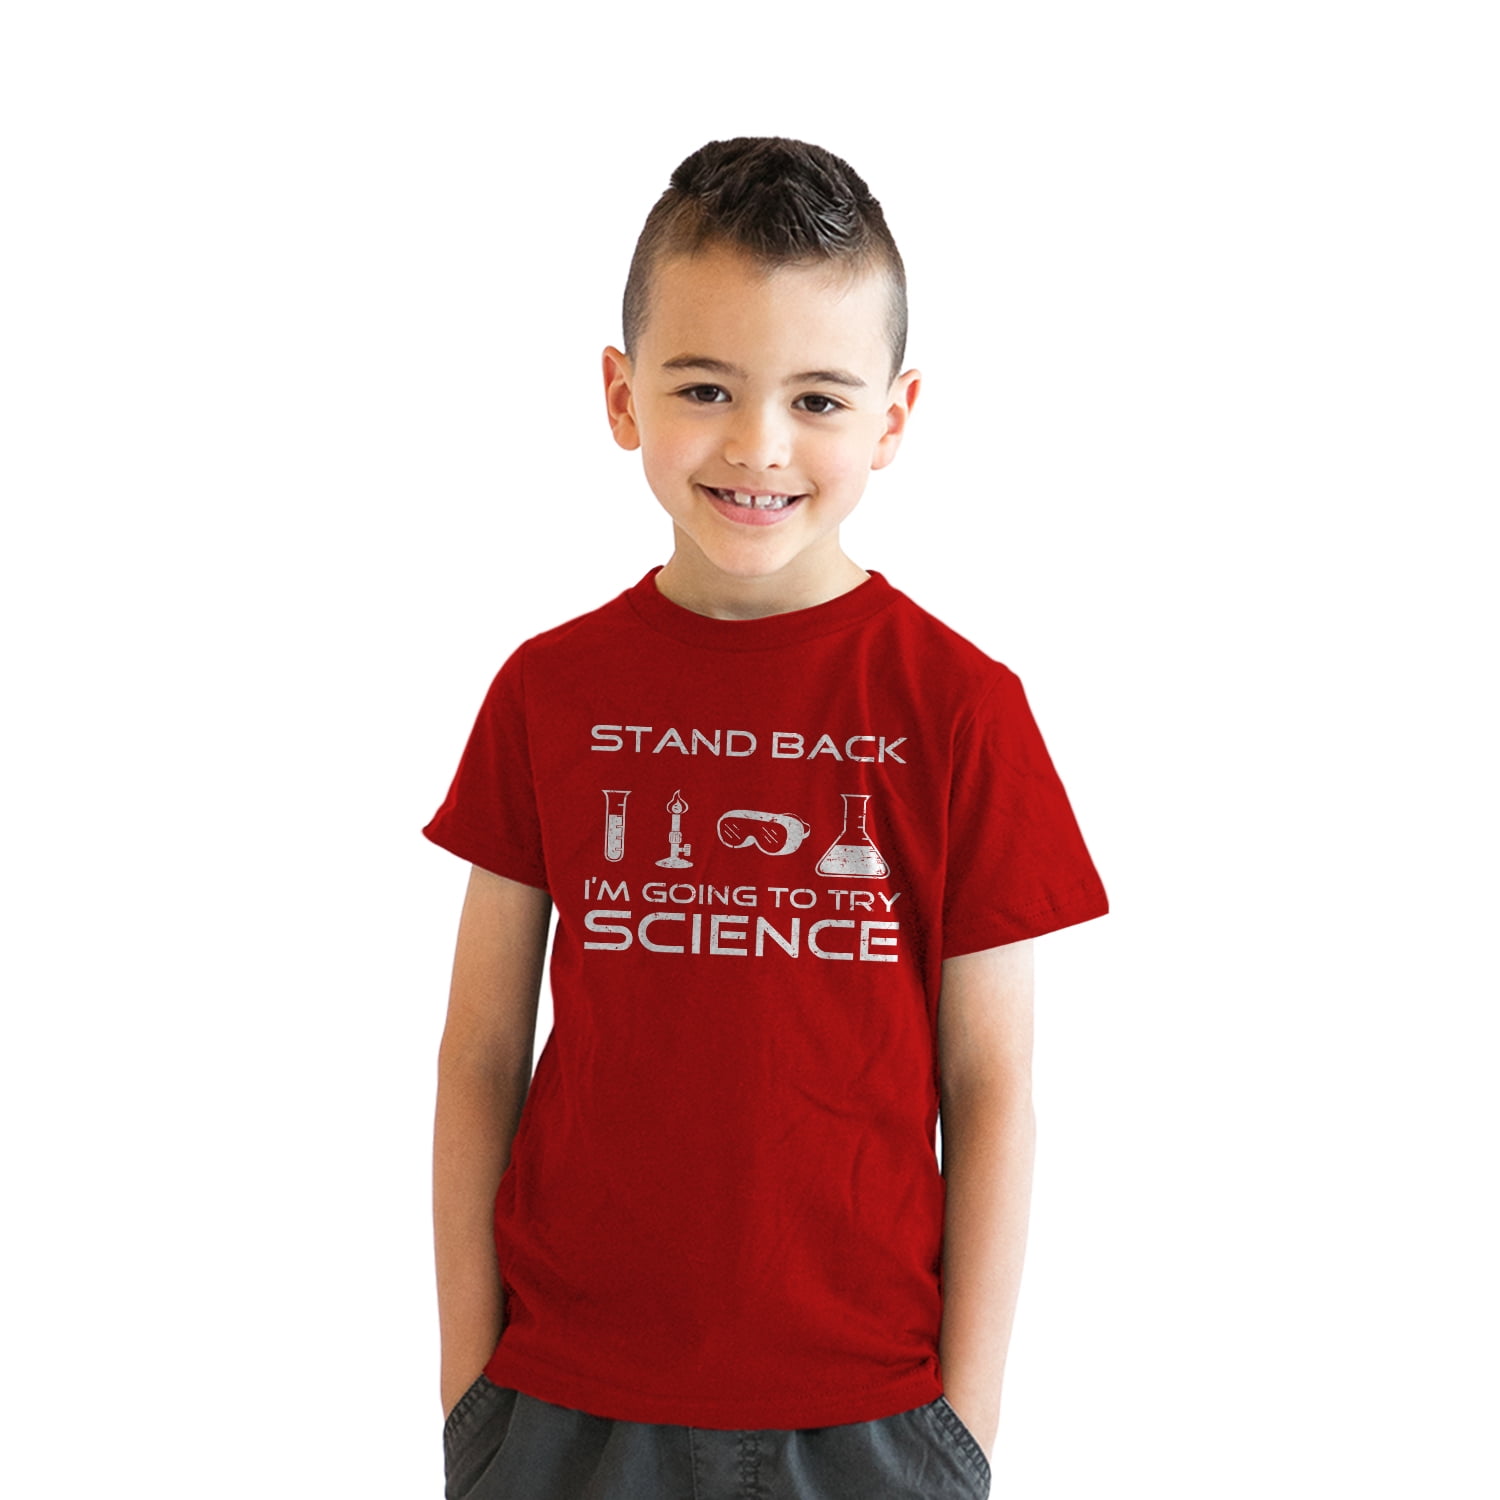 Science Like Magic But Real Funny Science Lovers Nerds Gift Men's Cotton T-Shirt